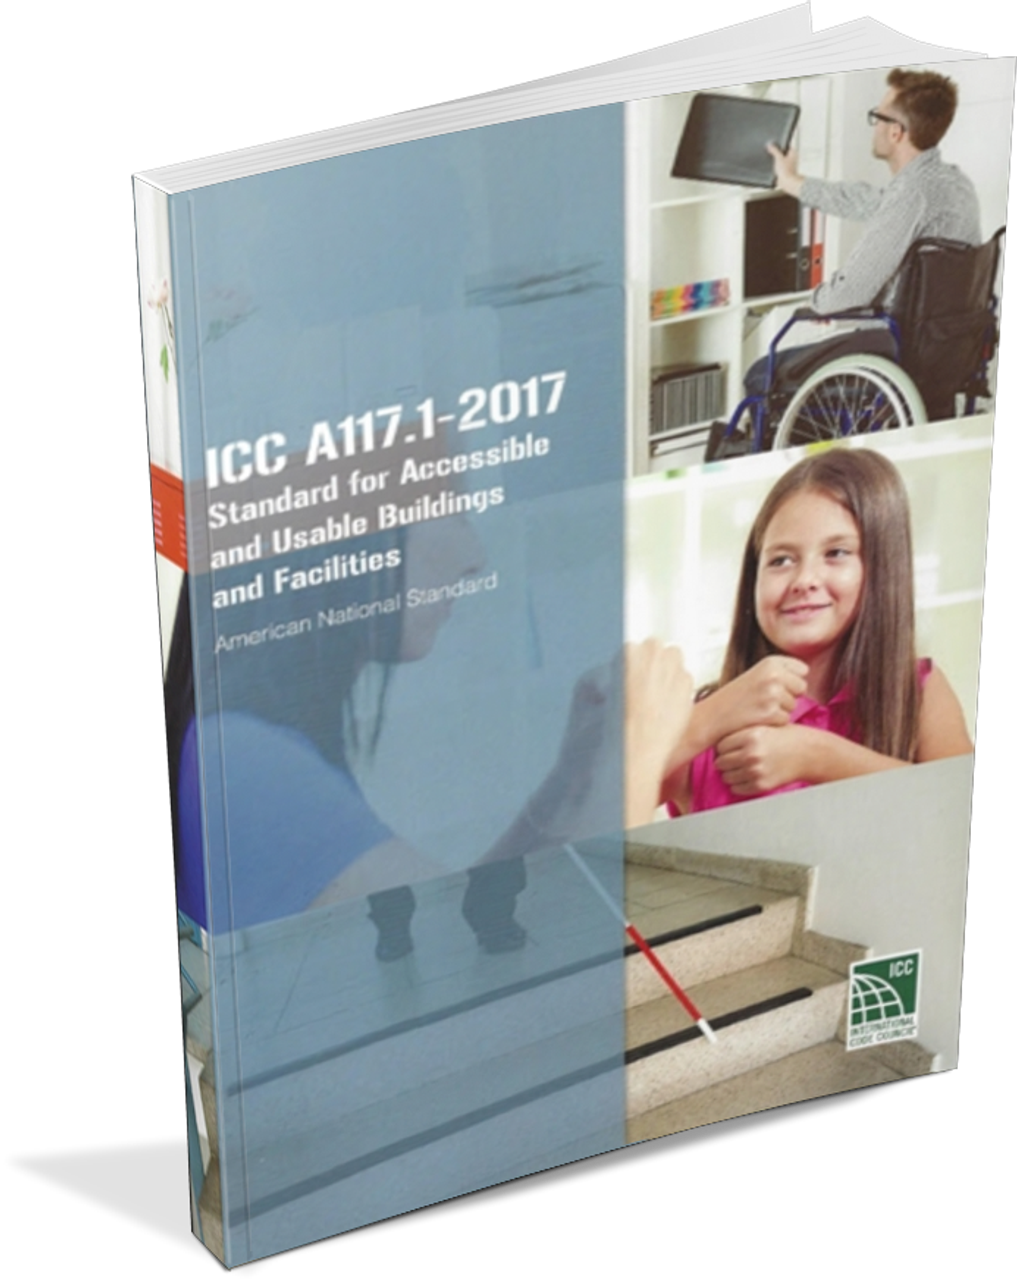 2017 ICC A117.1 Accessible and Usable Buildings and Facilities - CHAPTER 8  SPECIAL ROOMS AND SPACES - 804.2 Clearance.